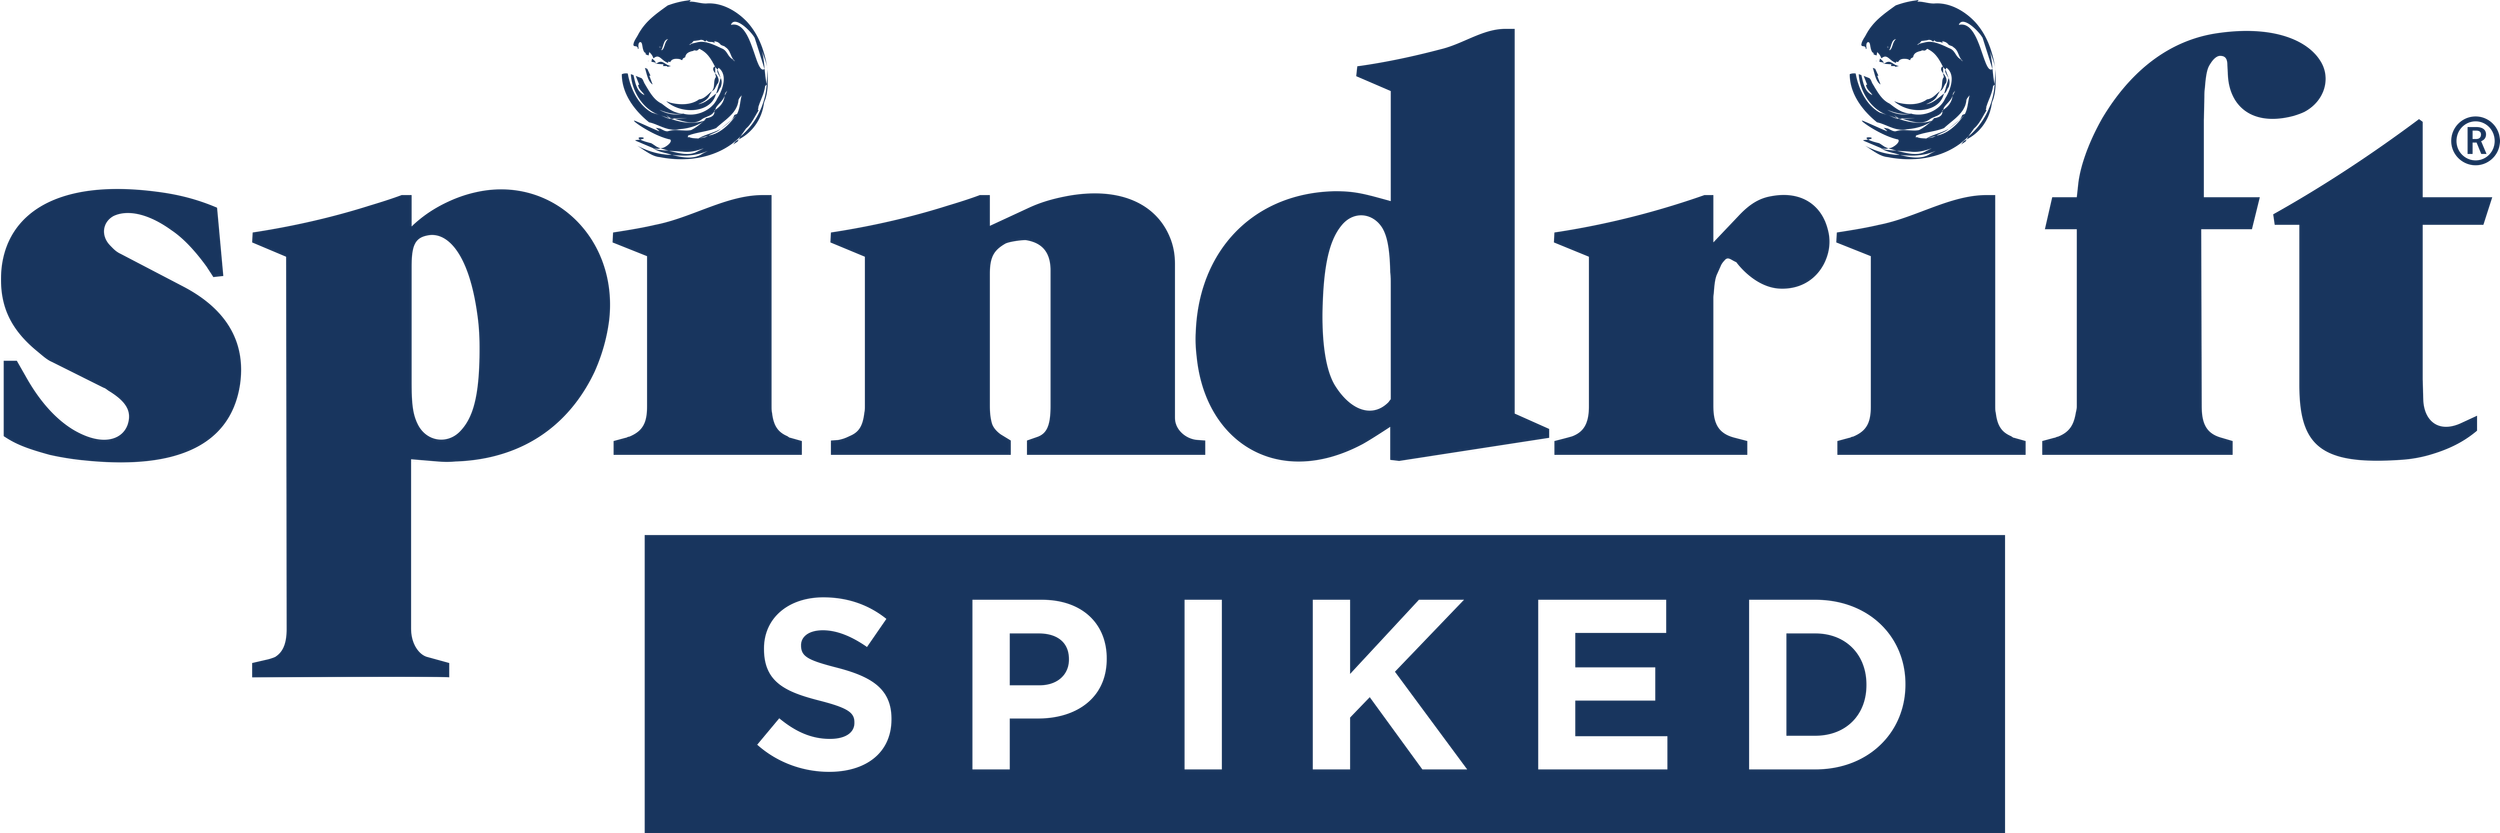 Spindrift_Spiked_Logo.png